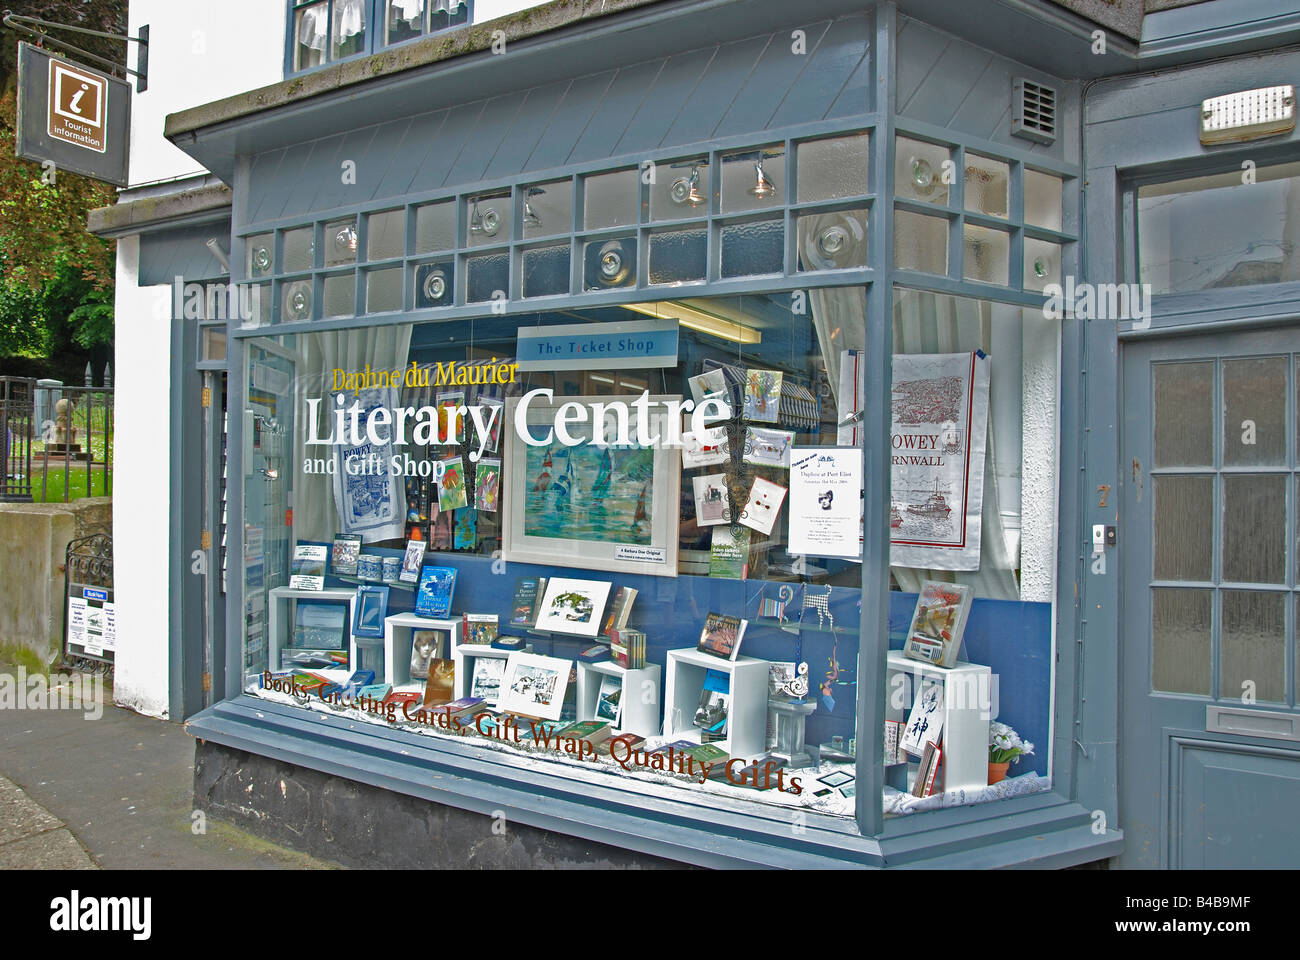 the daphne du maurier literary centre and bookshop infowey,cornwall,uk Stock Photo